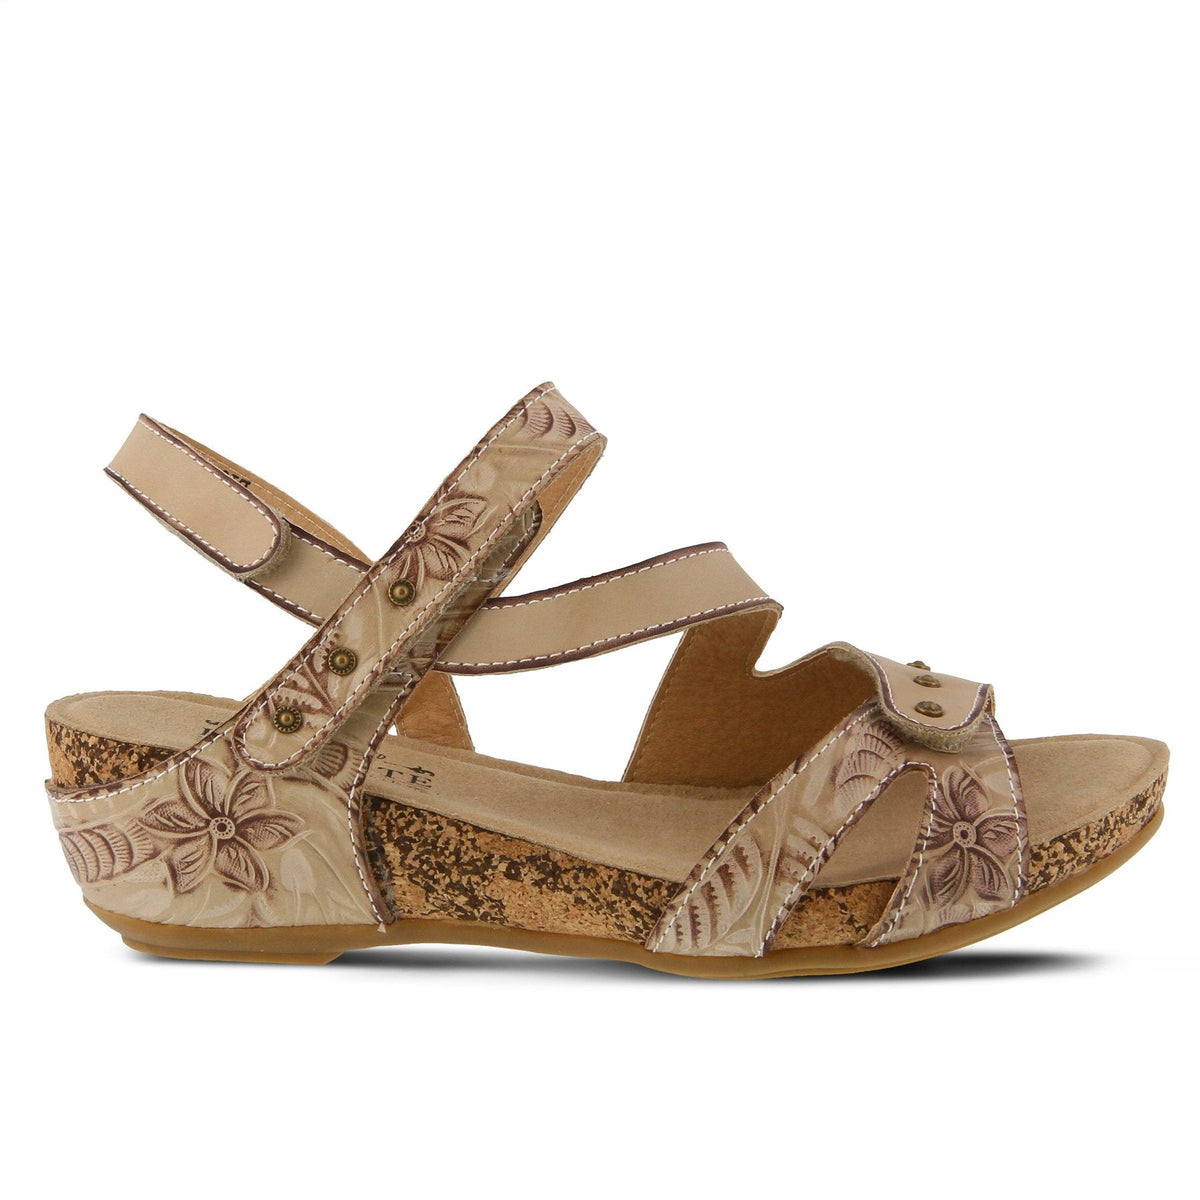 L'Artiste by Springstep Footwear Quilana hand-painted asymmetrical leather sandal has an earthy embossed floral design adorned with antiqued metal buttons for an artsy easy look.